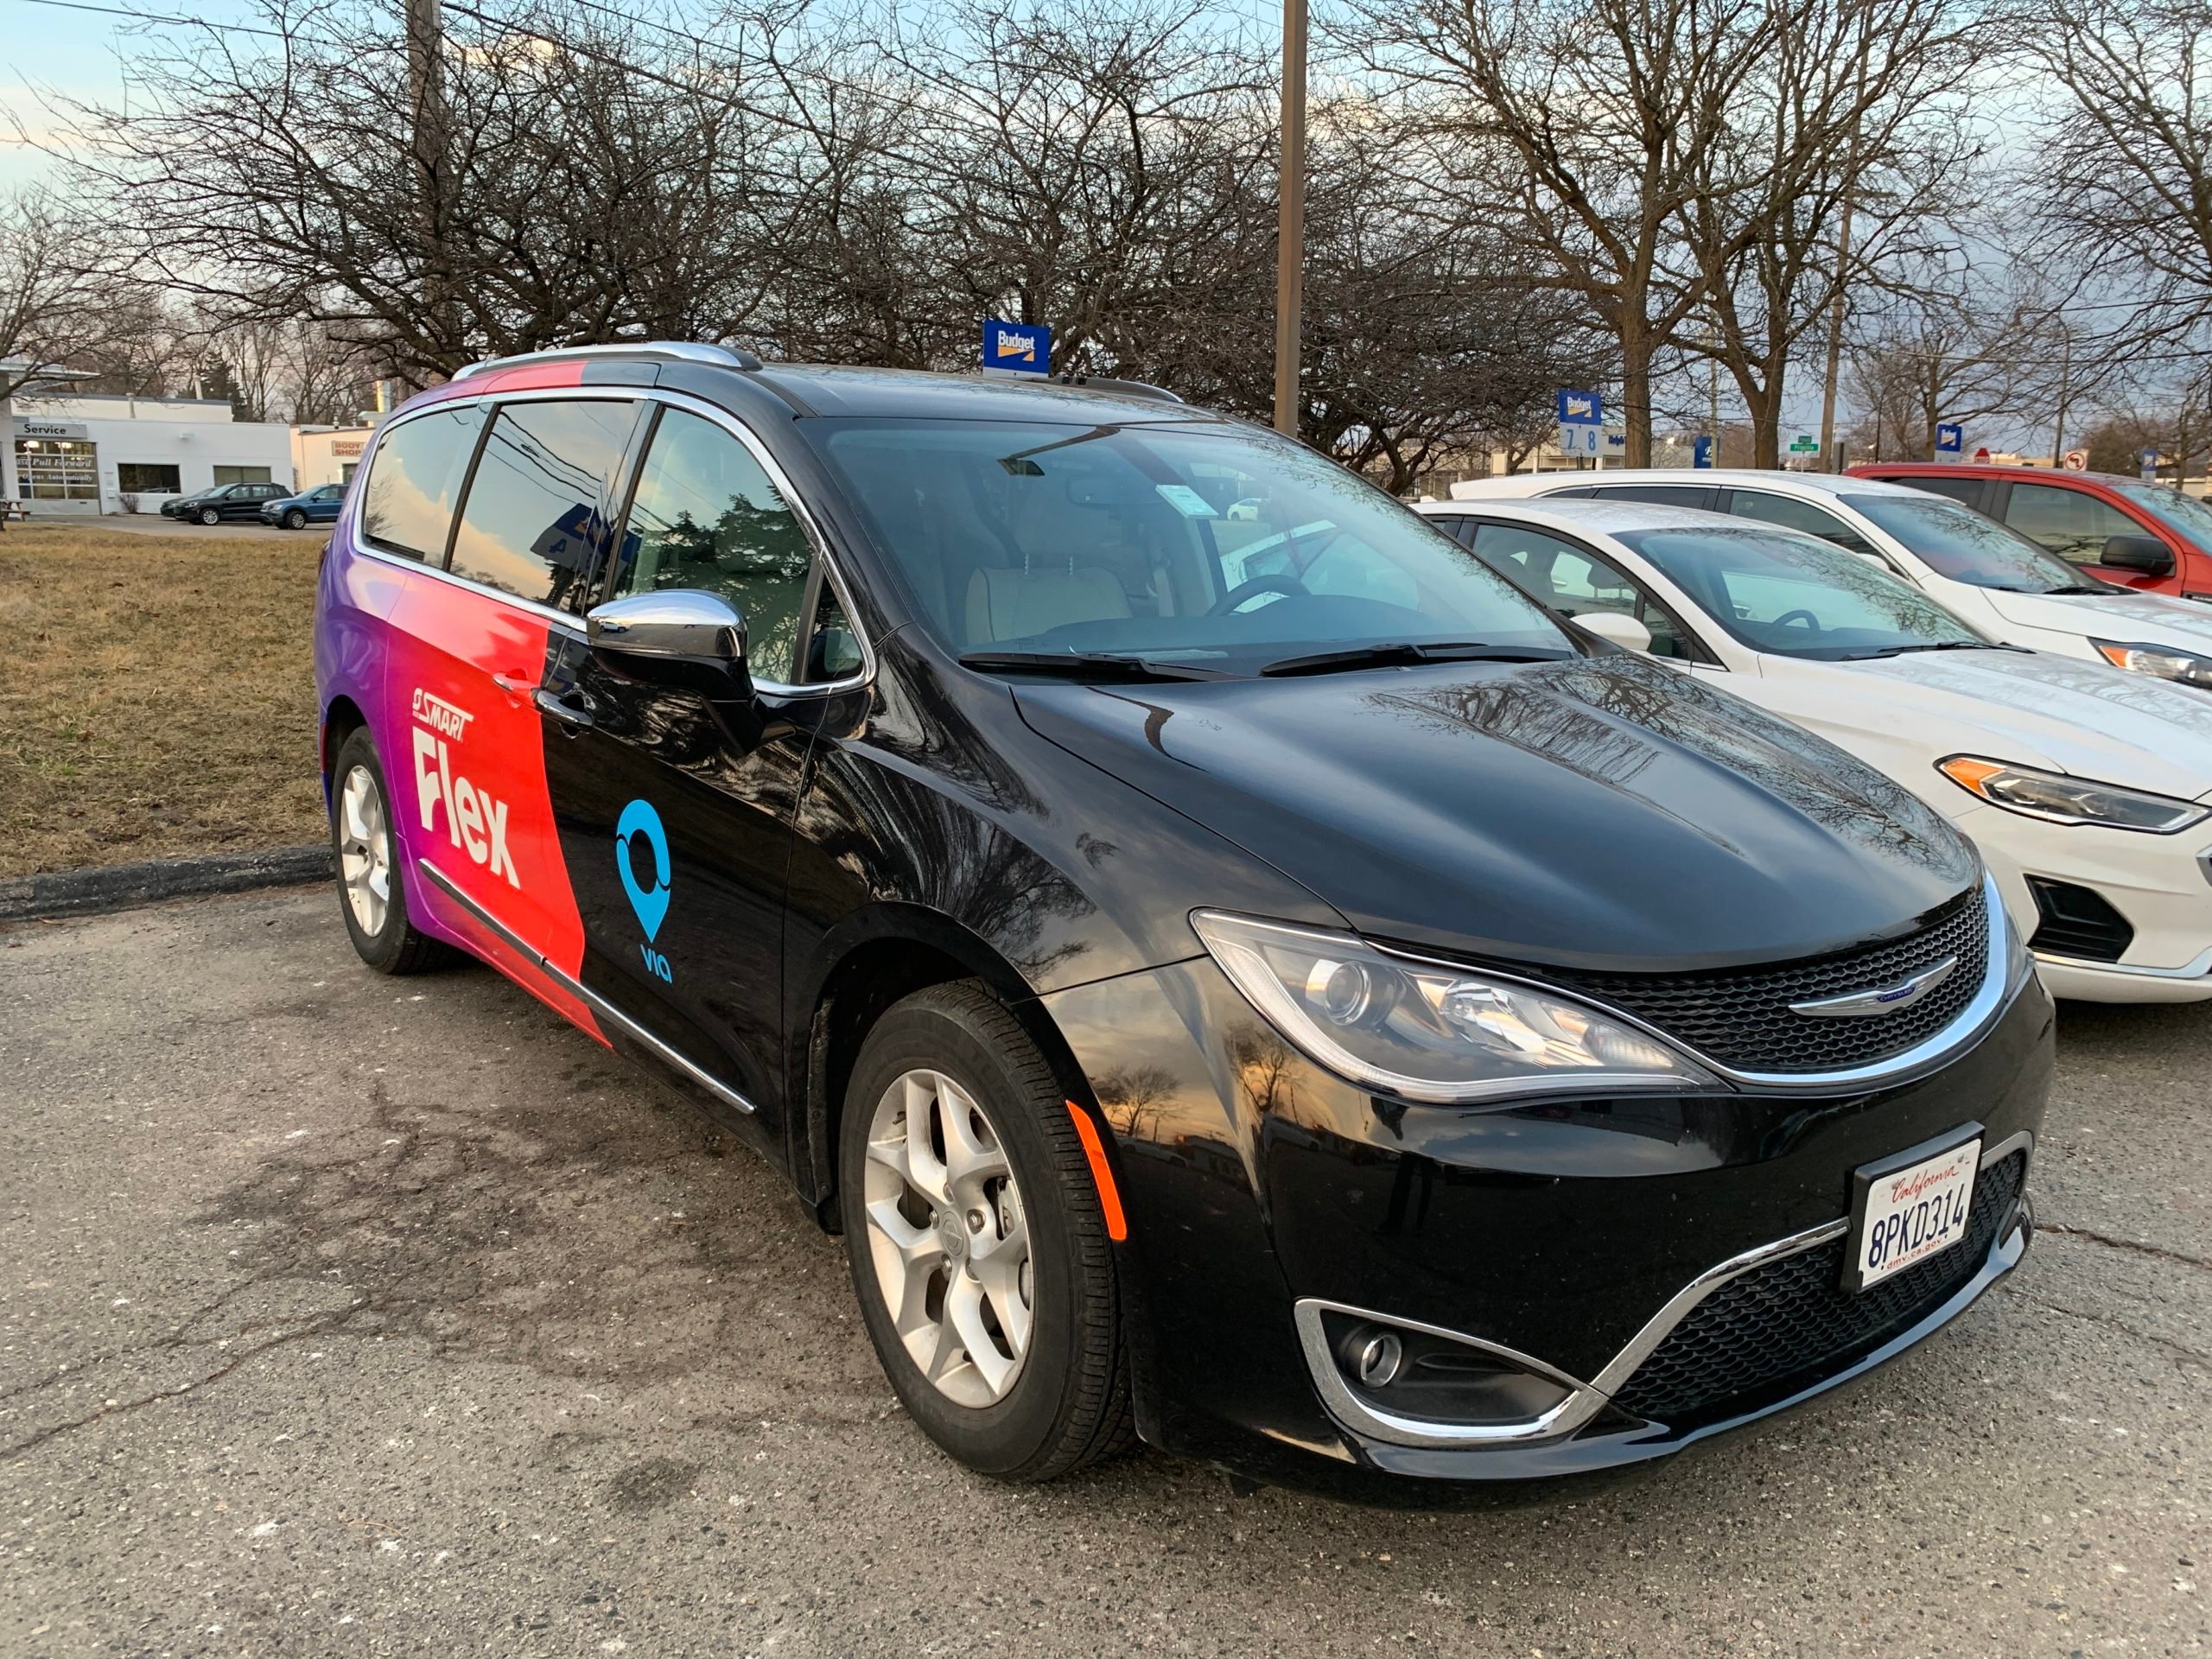 Dearborn partners with SMART Flex rideshare to offer rides for $1